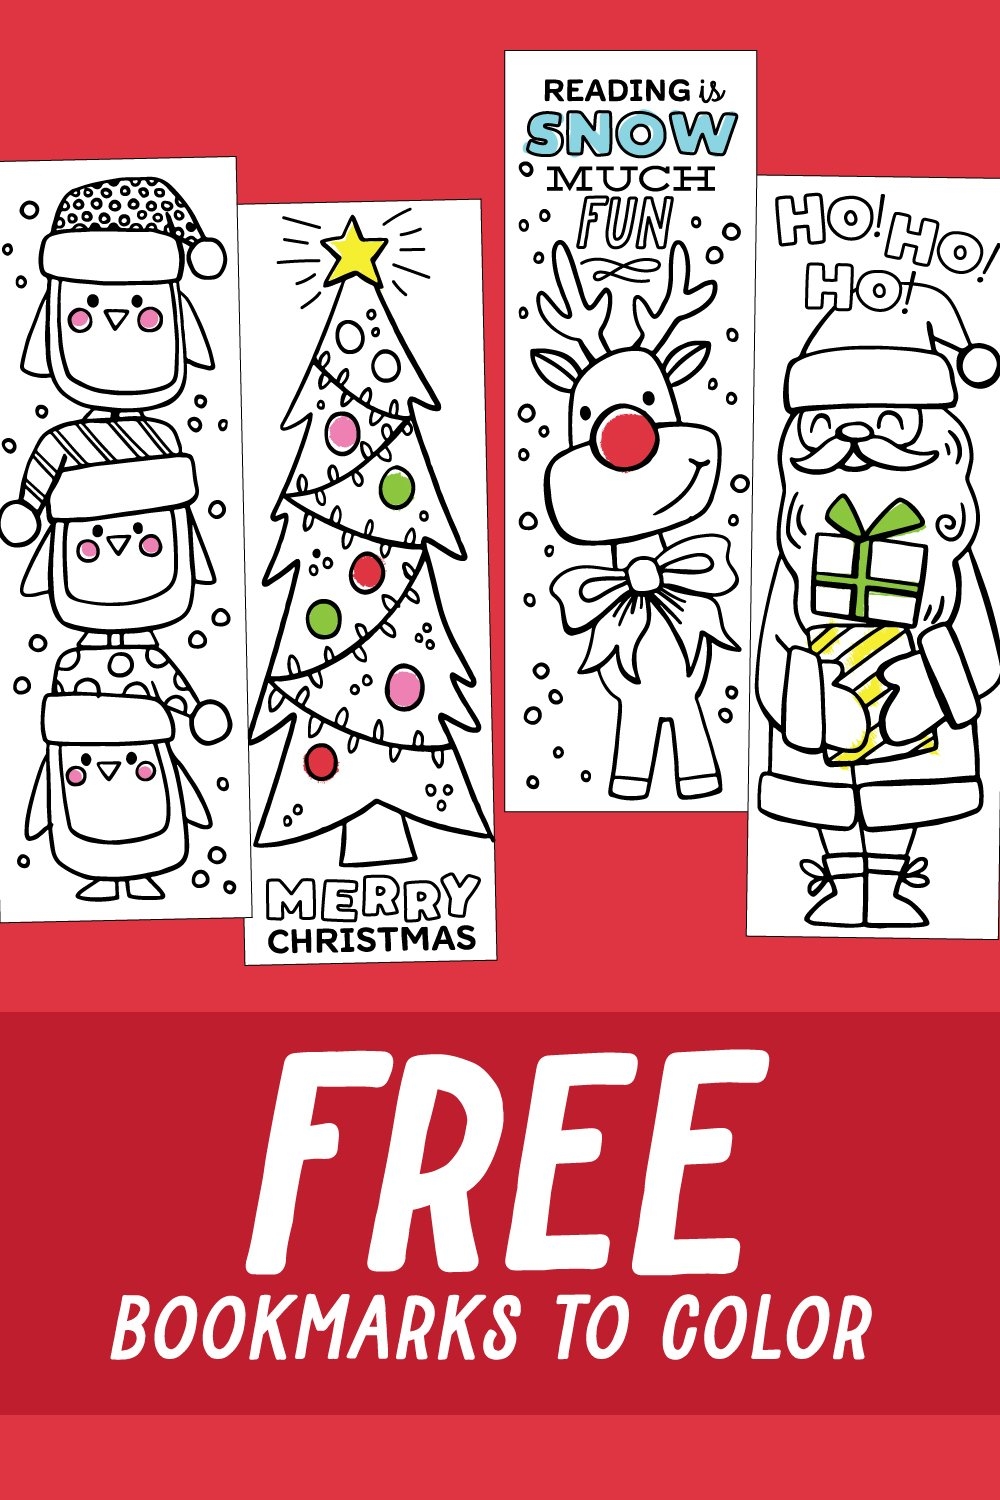 Free Christmas Coloring Bookmarks Jessie Steury - Free Printable Bookmarks For Christmas